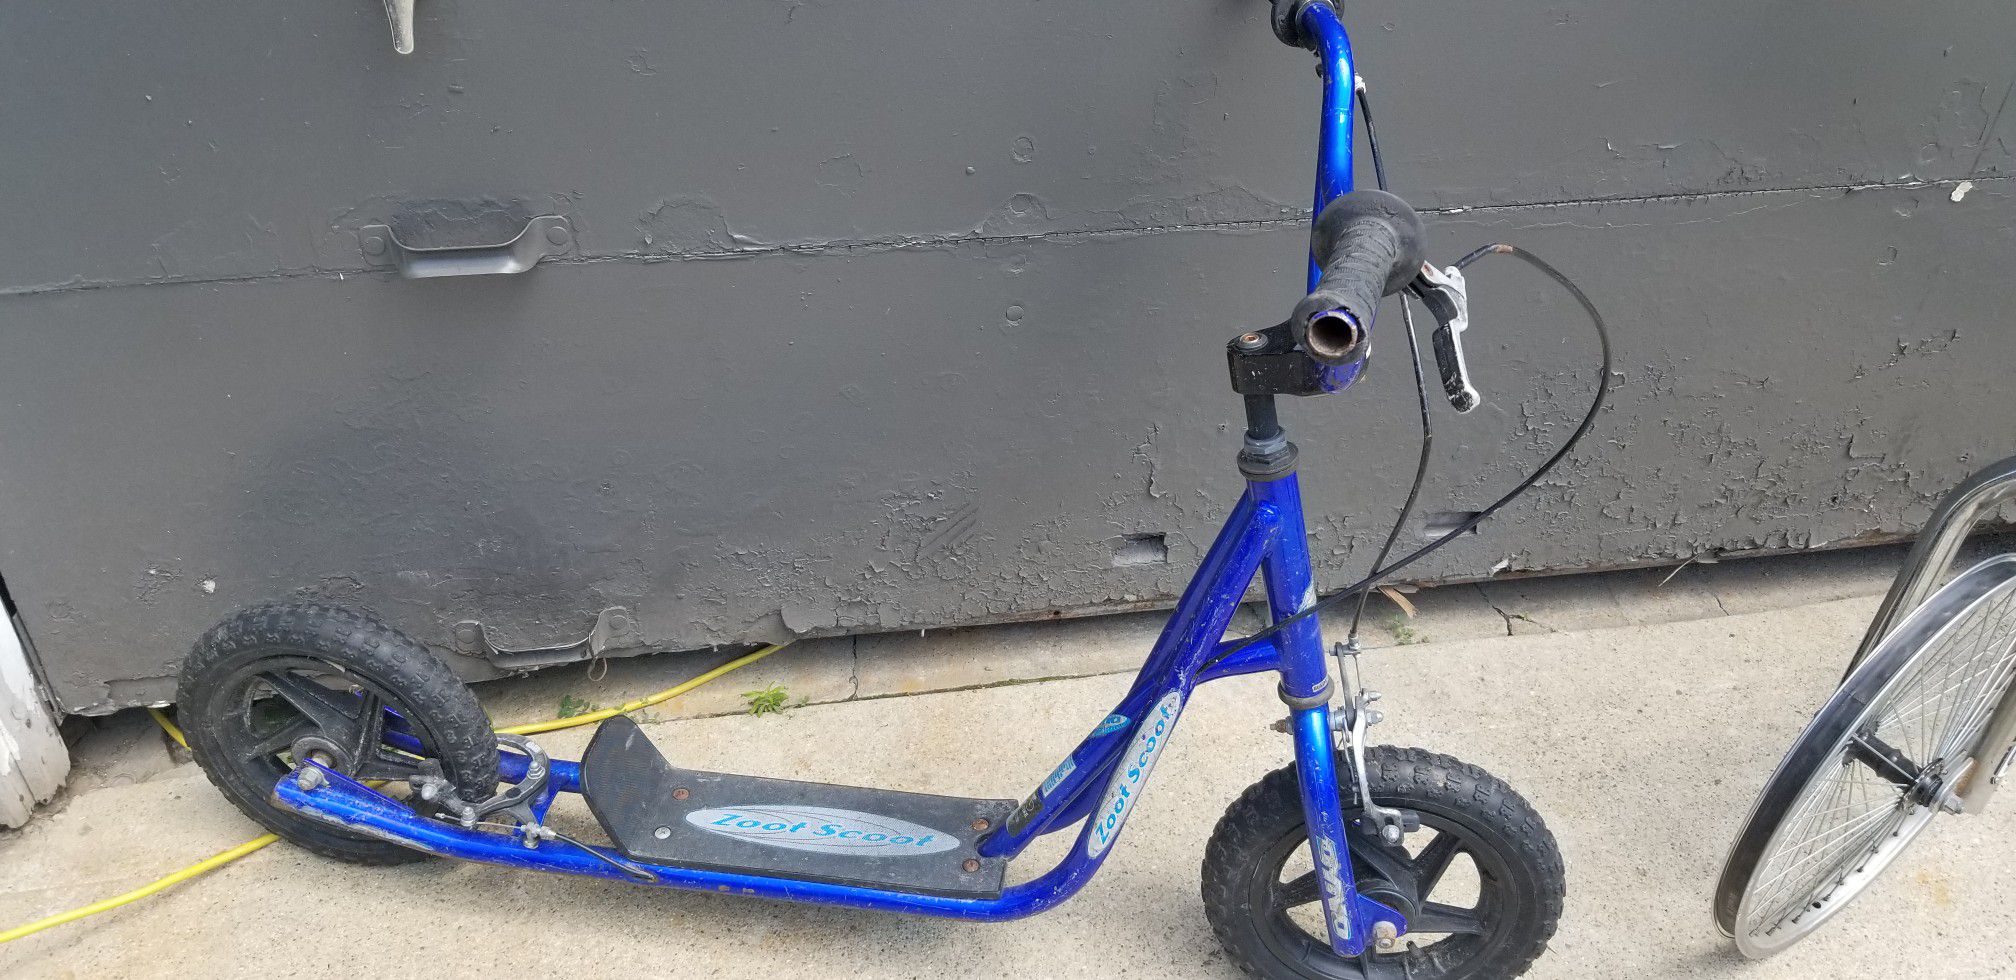 Dyno zoot scoot 90s gt dyno scooter bmx for Sale in Milwaukee, WI 